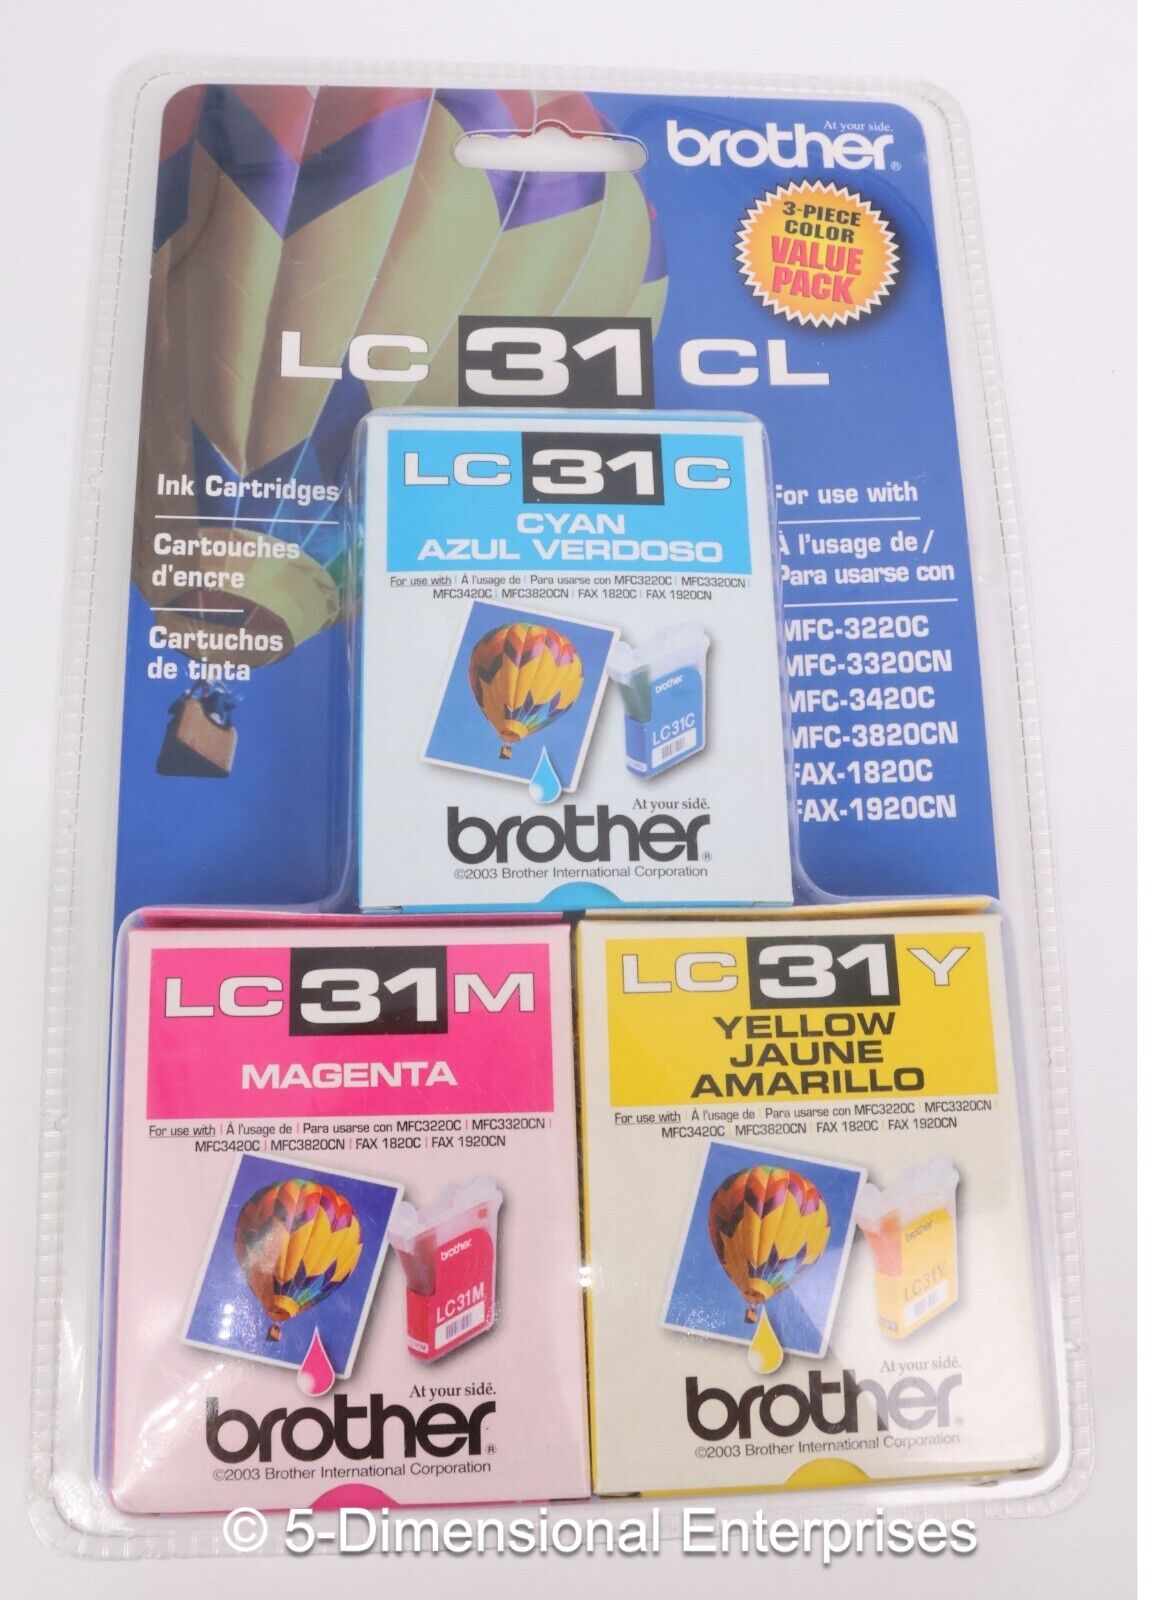 BROTHER LC 31 CL 3-Pack INK CARTRIDGES - Cyan Magenta Yellow - New Sealed 2006